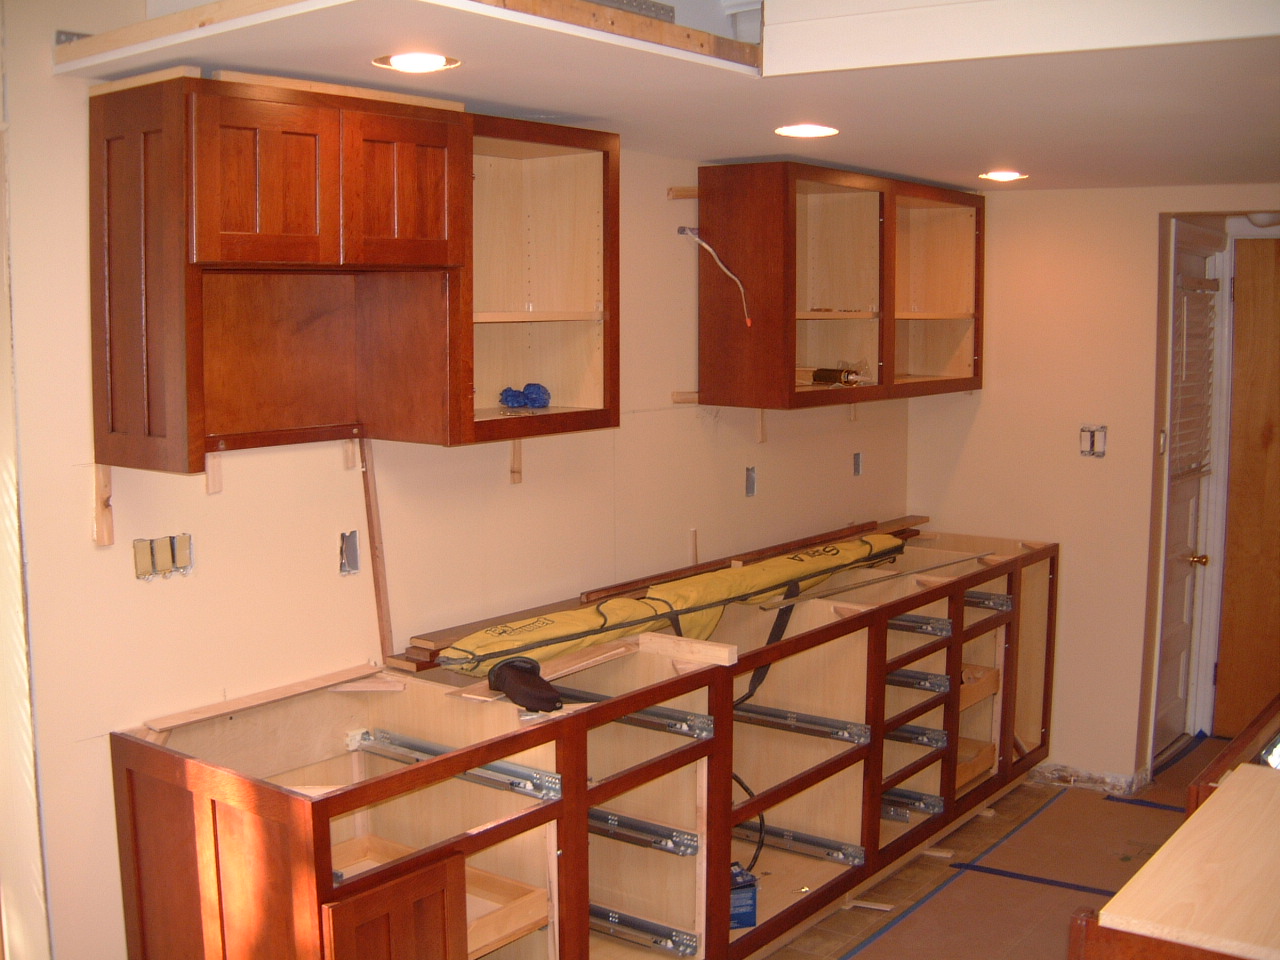 Installing Kitchen Cabinets Can Be Easy The Kitchen Blog